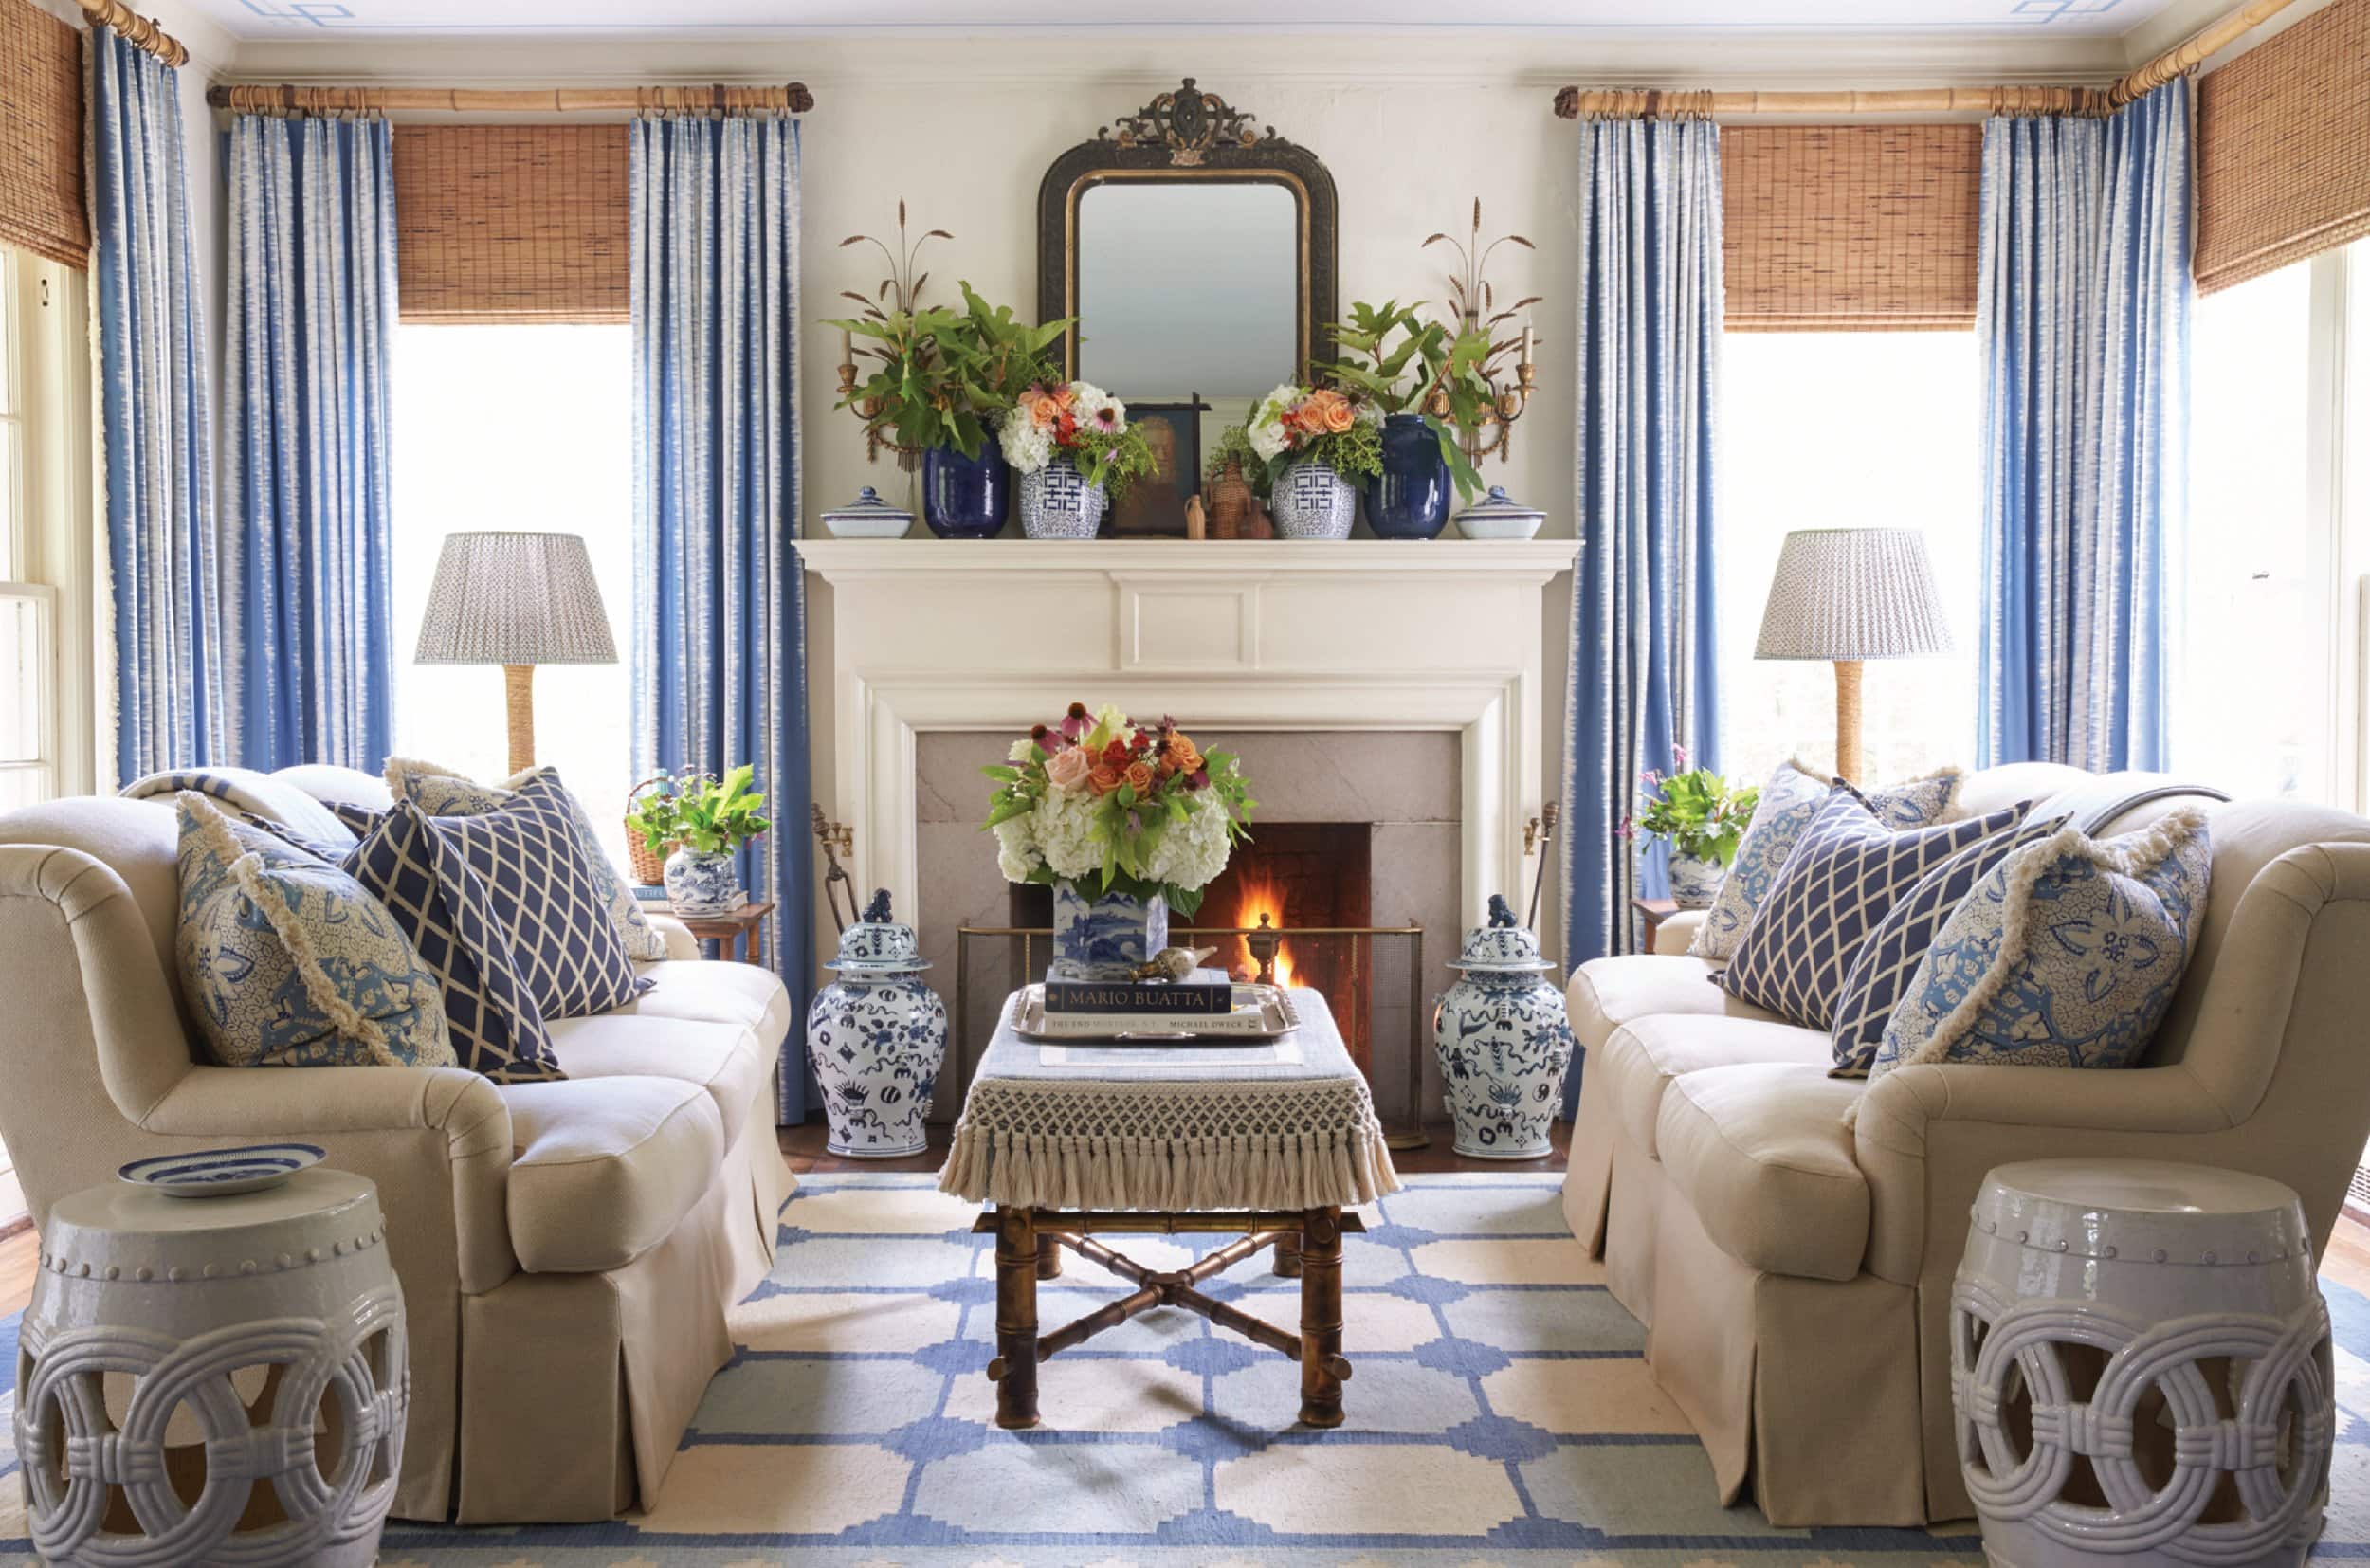 White and blueliving room featured in interiors designed by Heather Chadduck relaxed elegance design